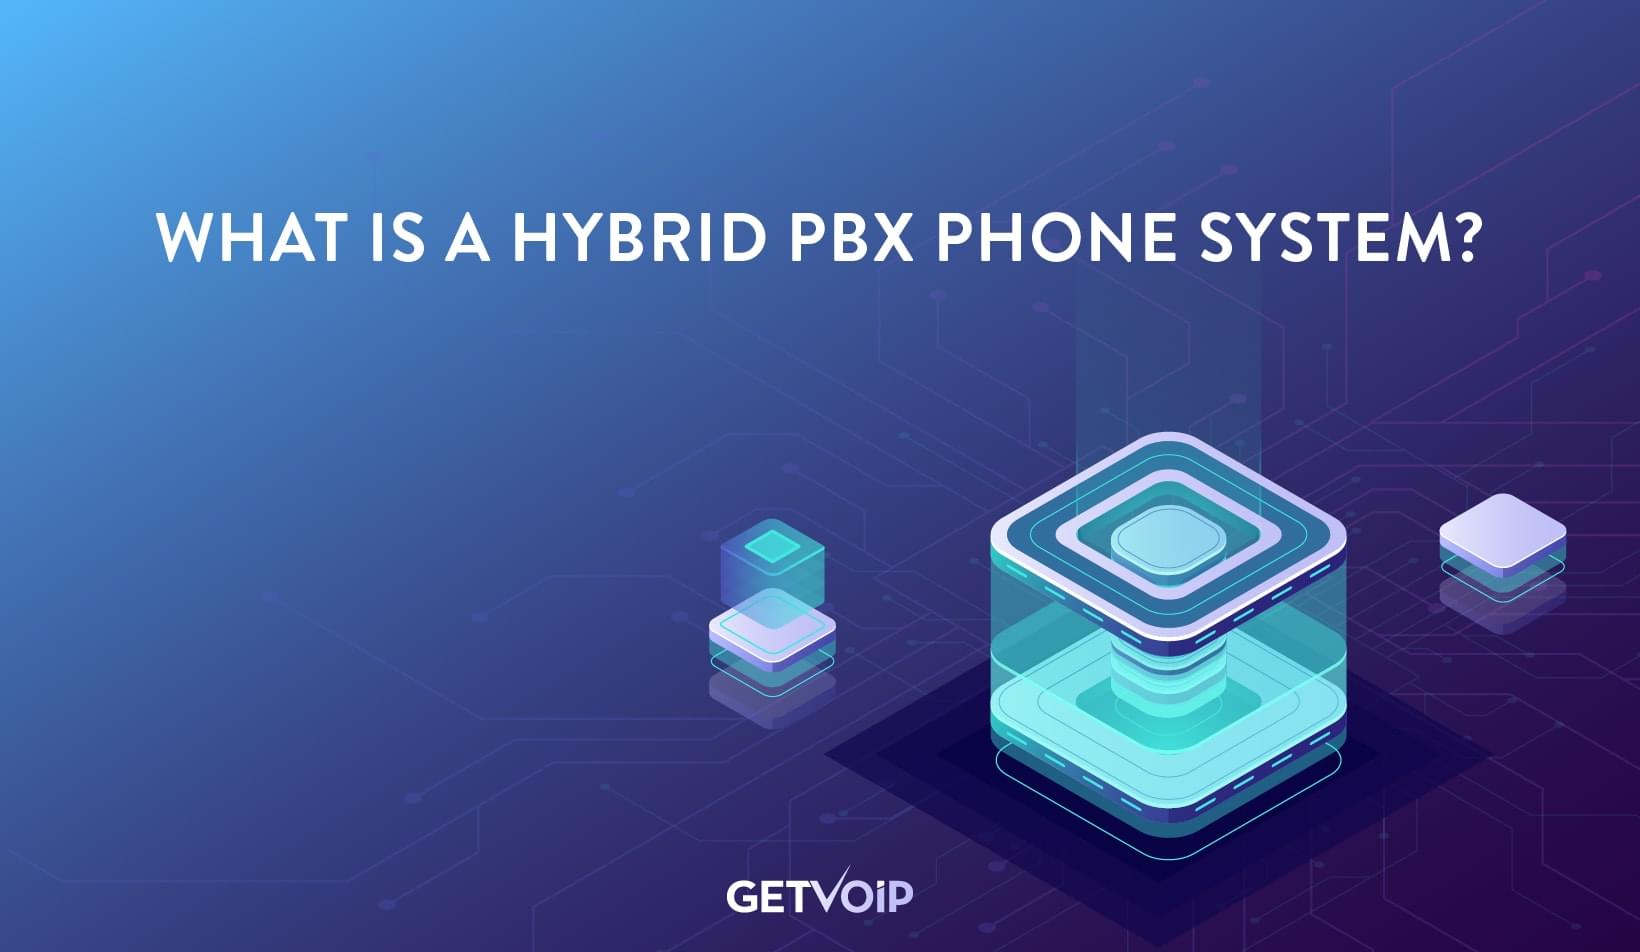 What is a Hybrid PBX Phone System?